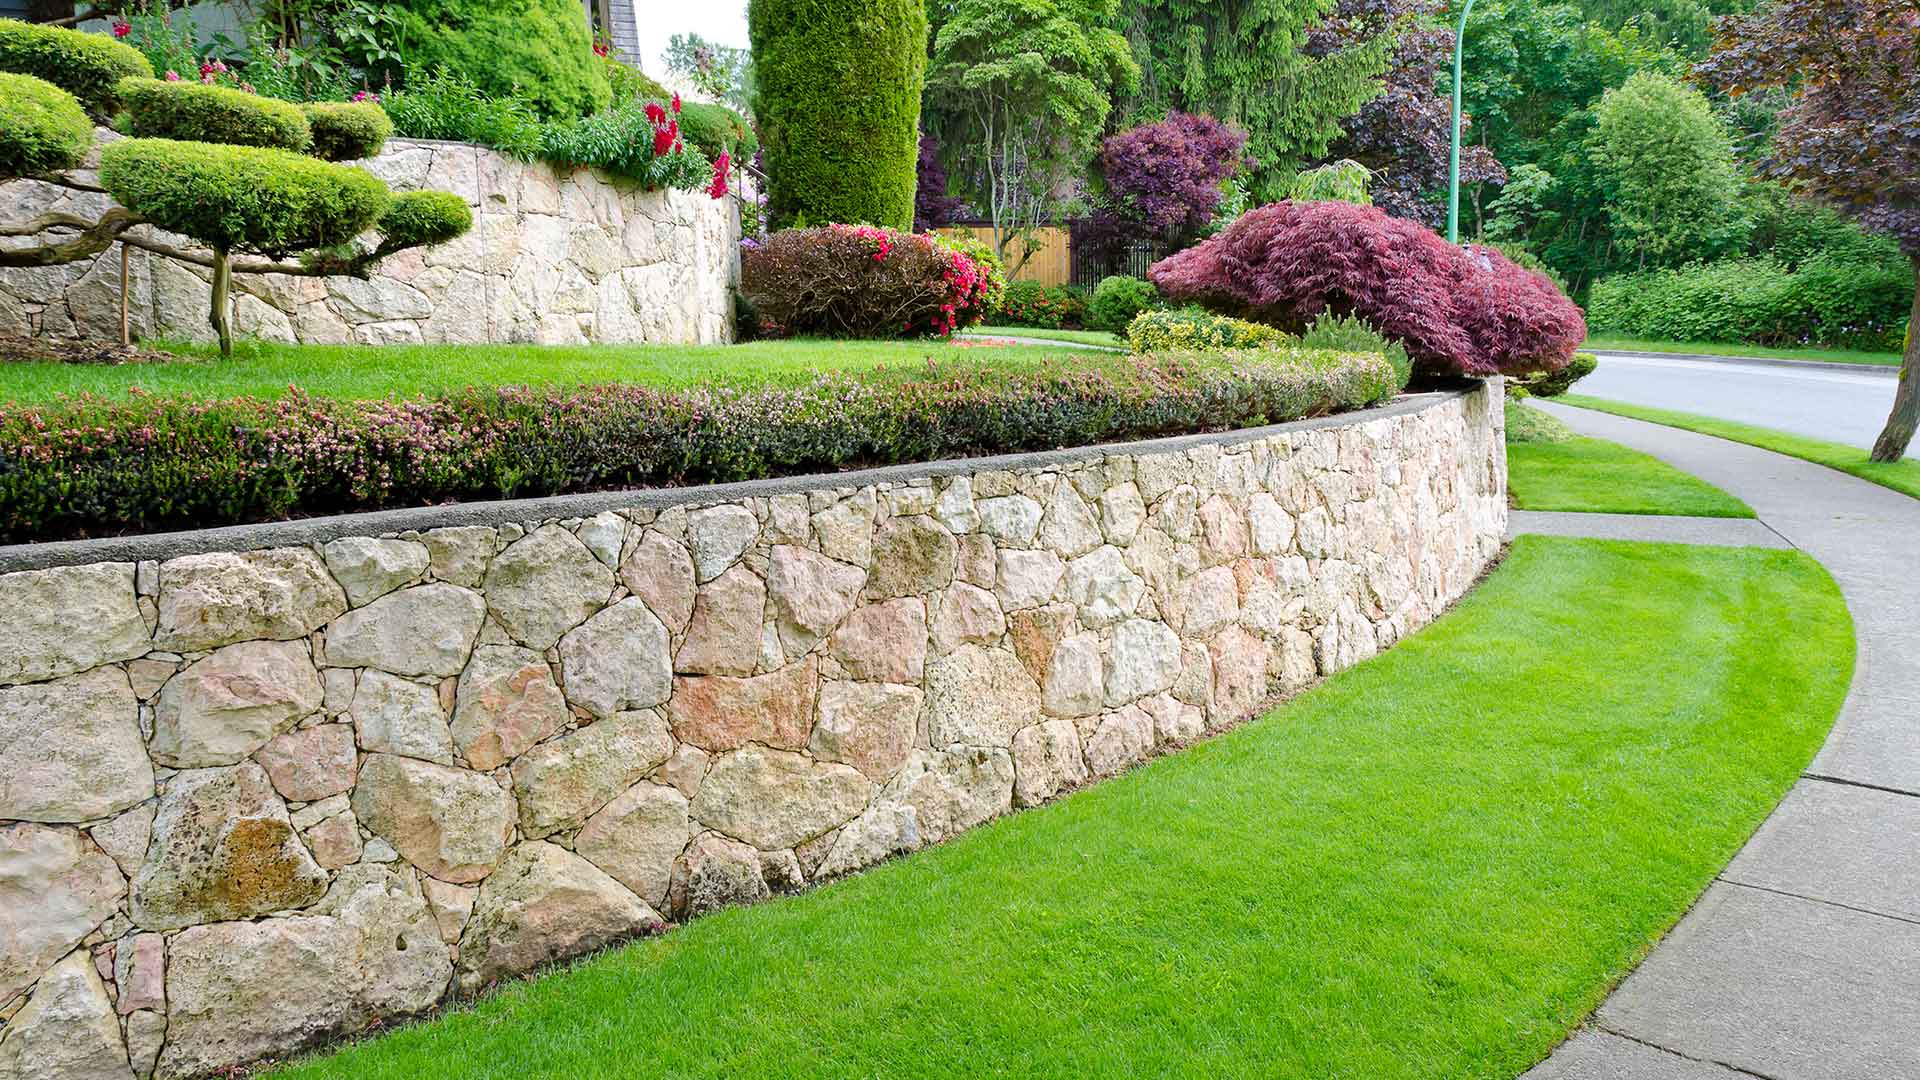 Gorgeous retaining wall with landscape bed and healthy grass.